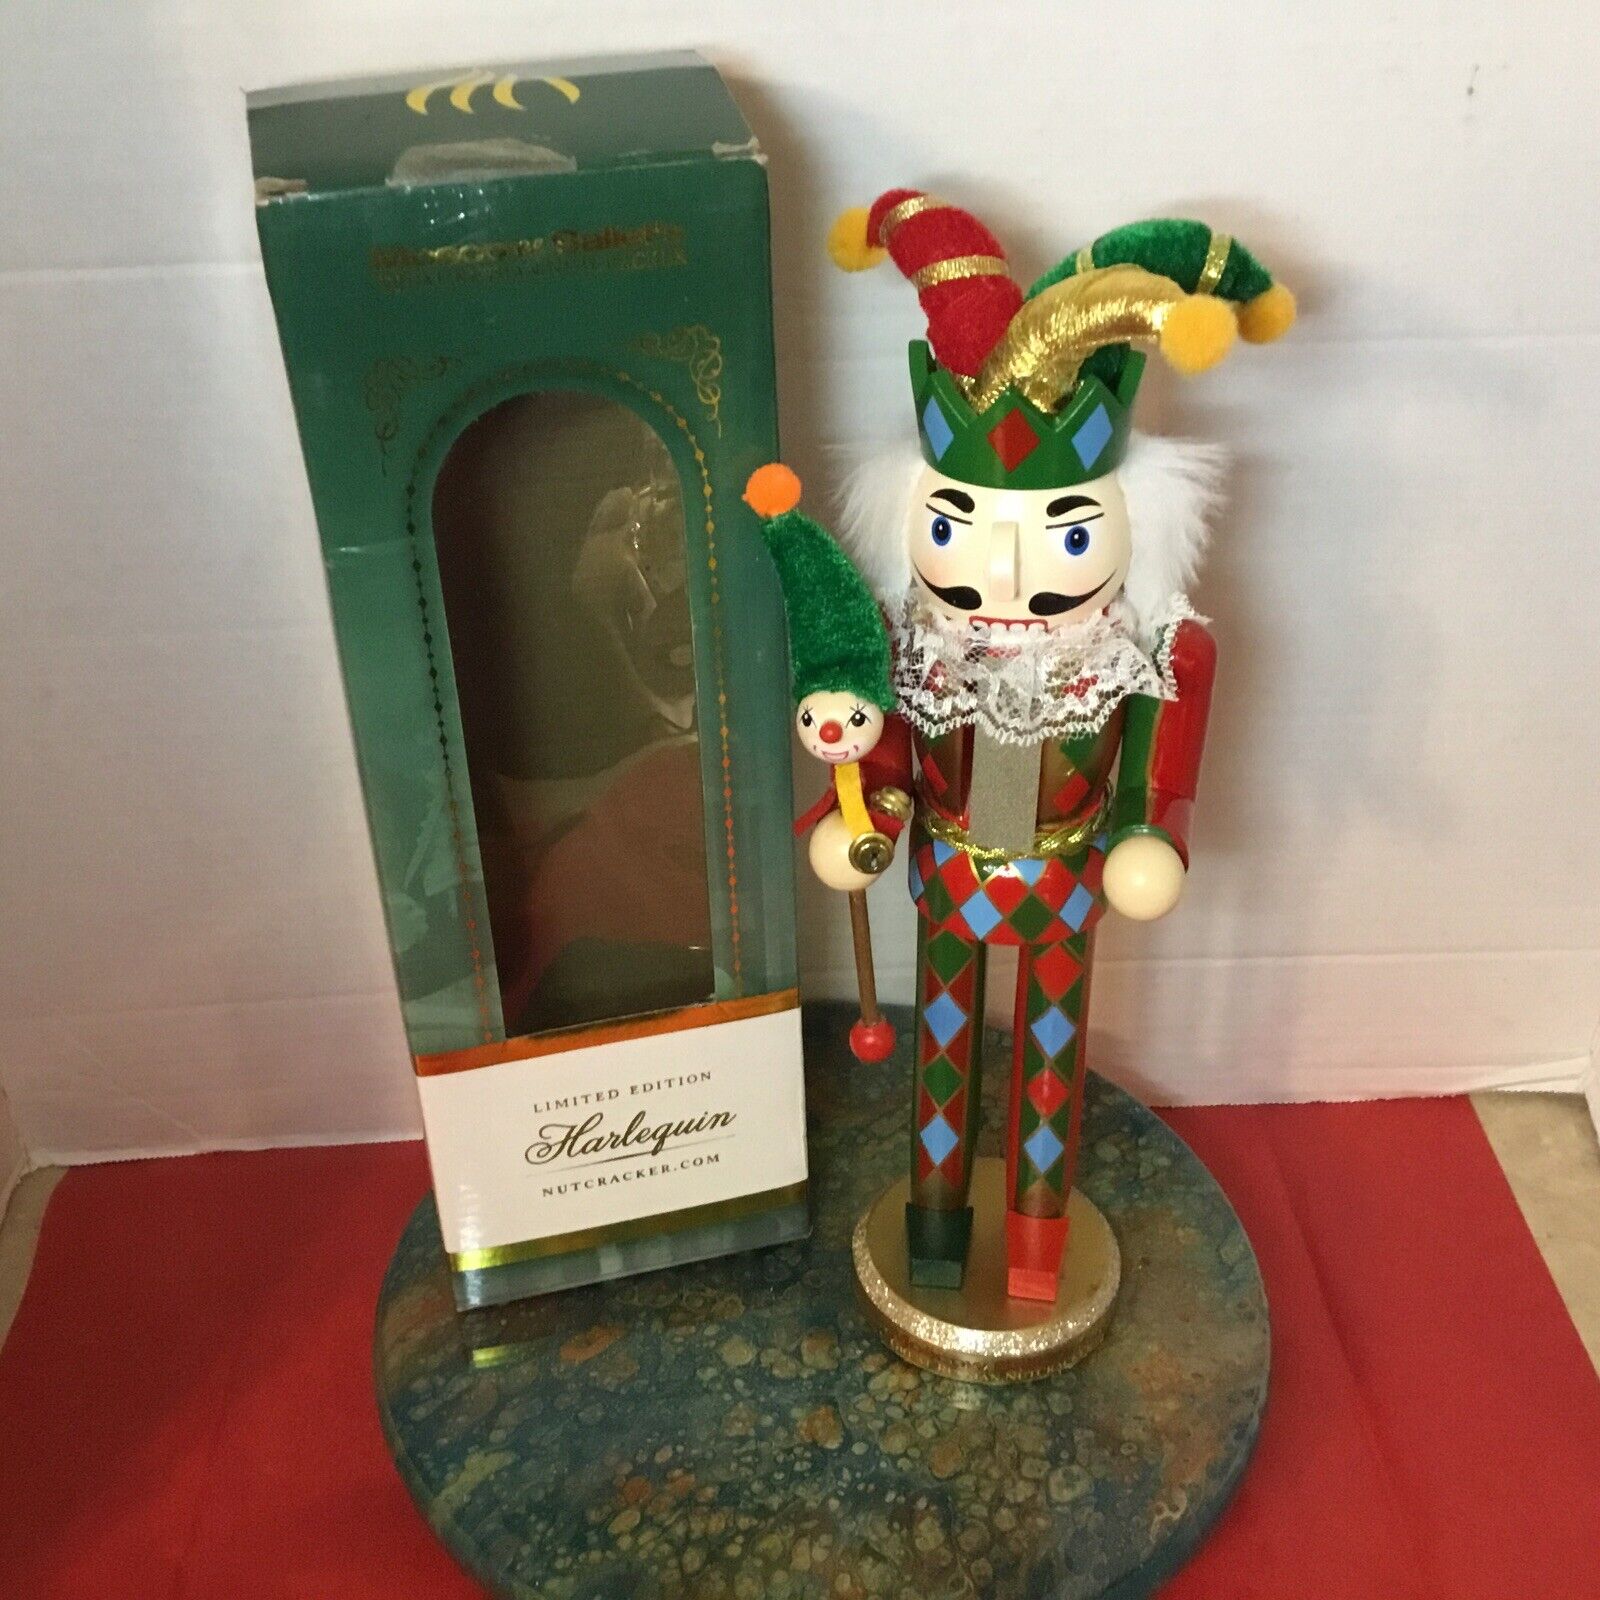 Moscow Ballet’s Great Russian Nutcracker Wooden Figurine Jester Limited Edition